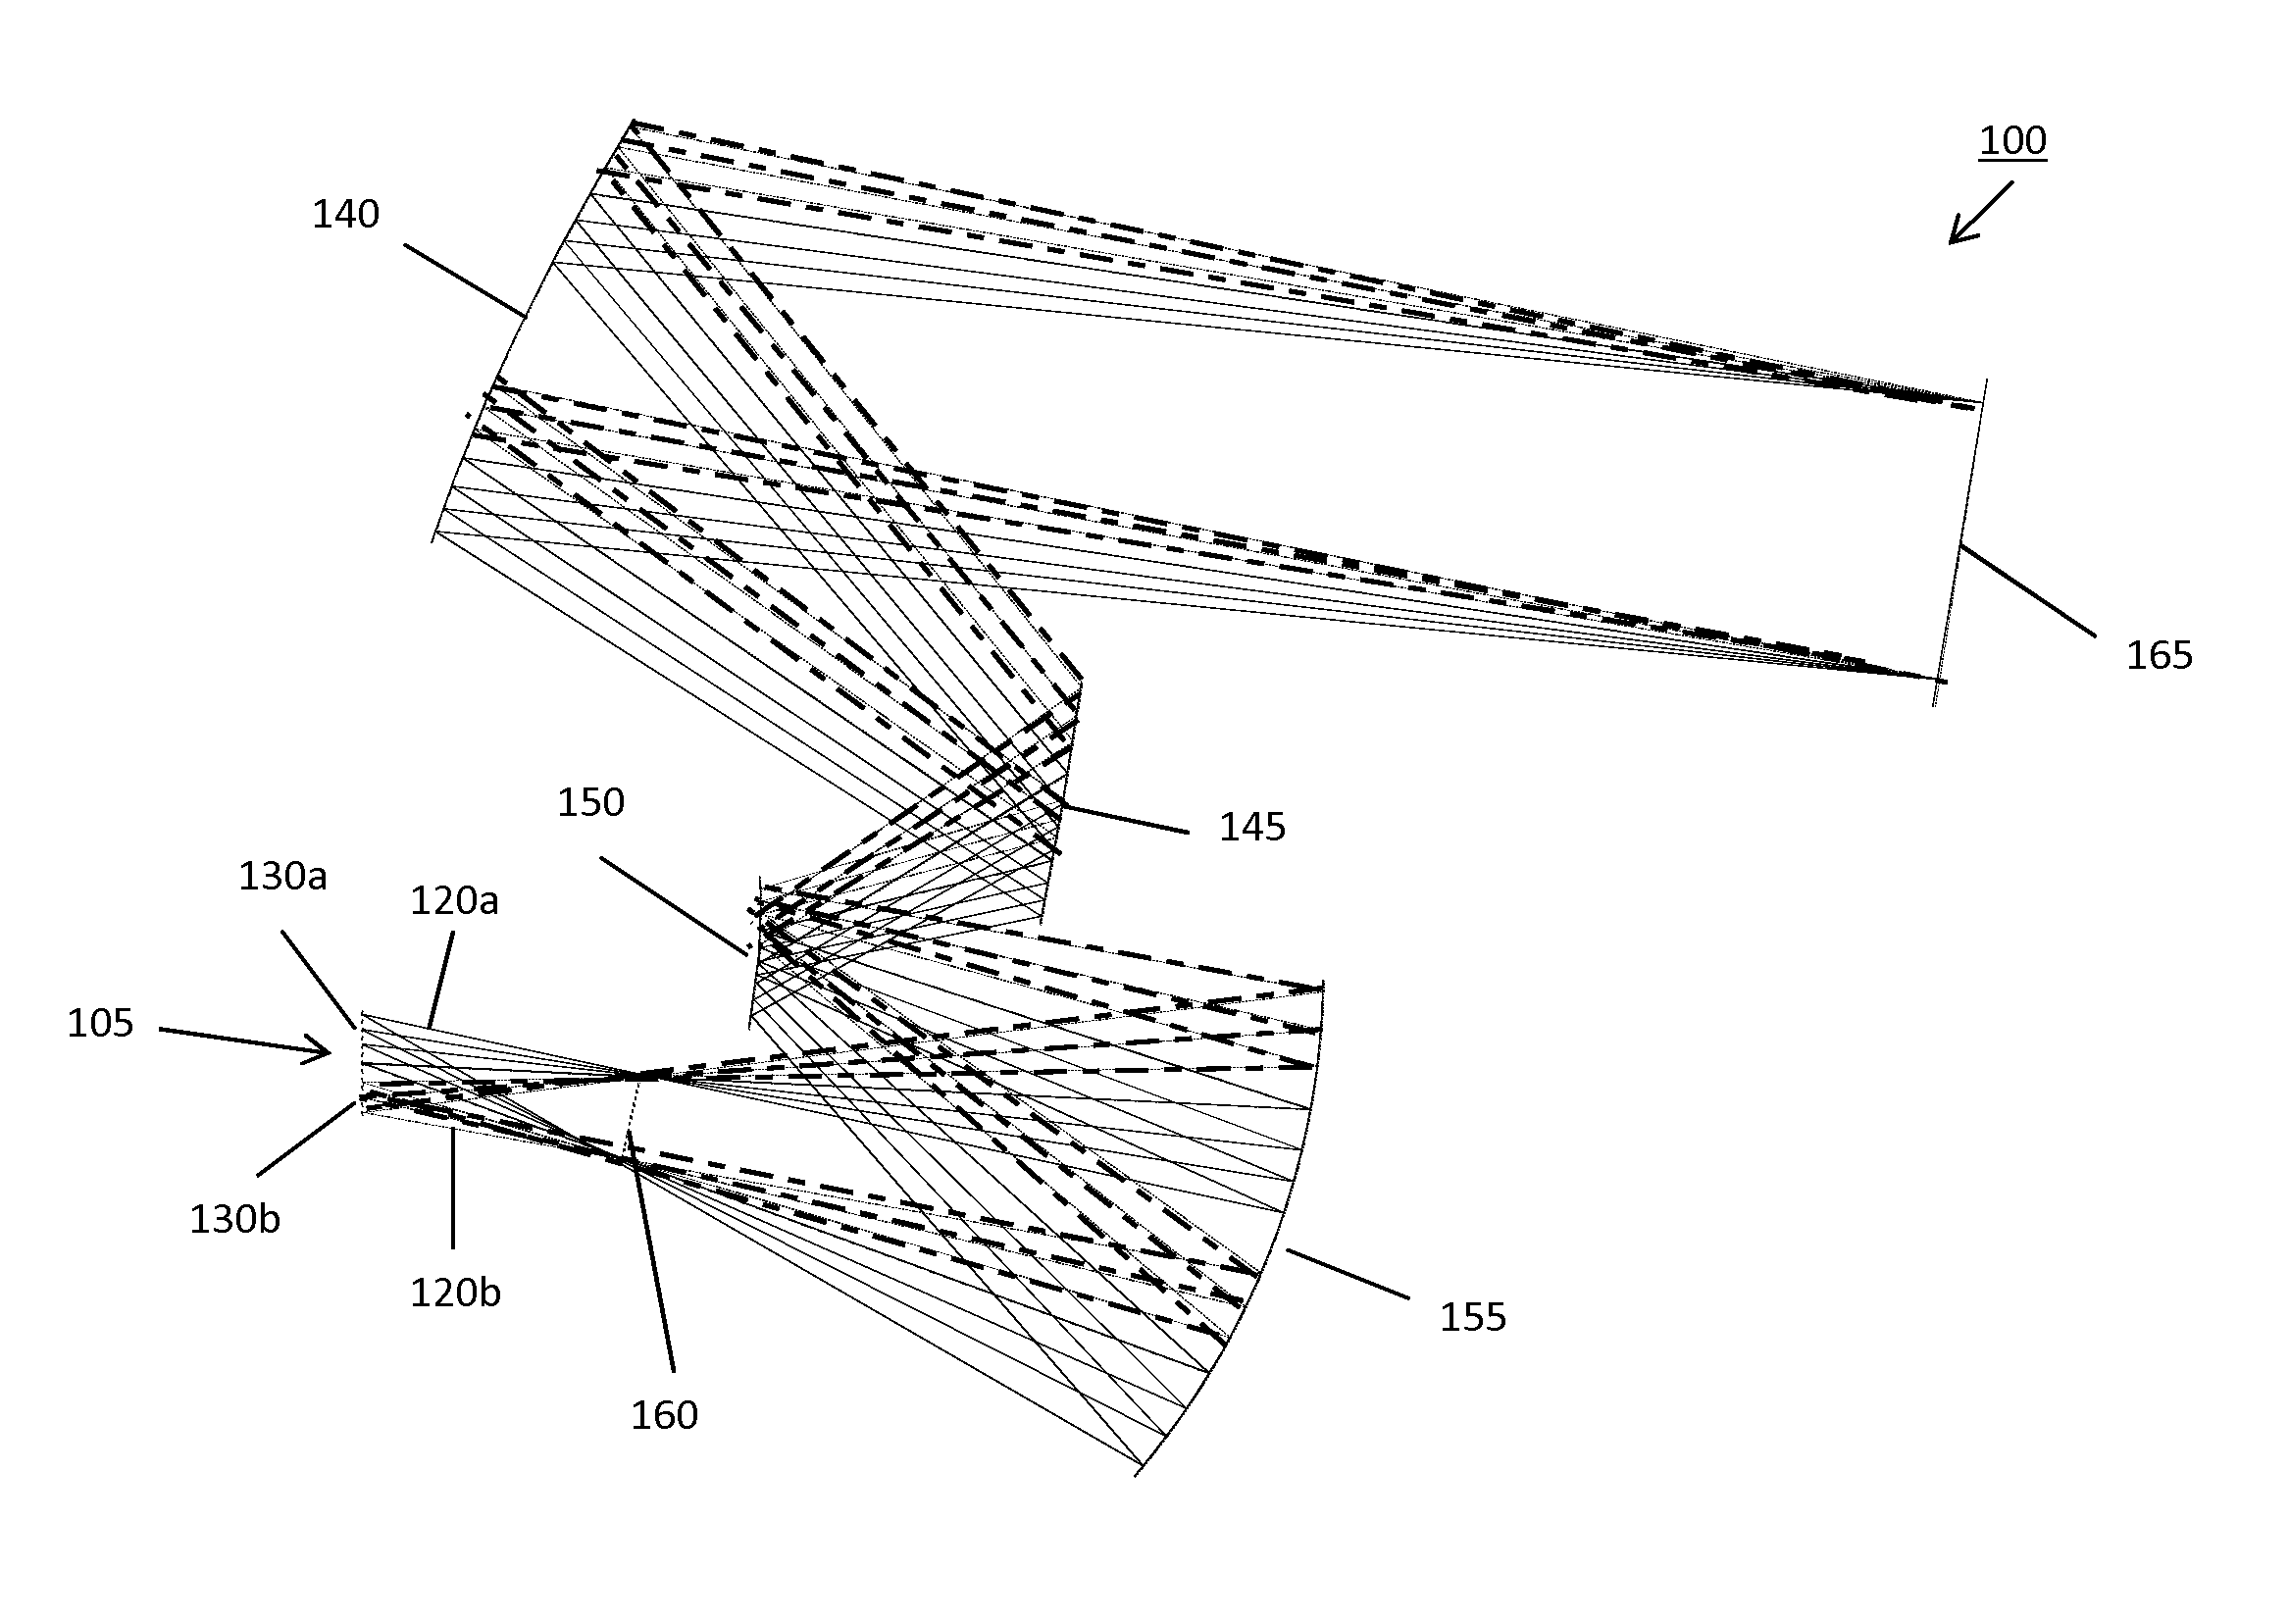 Optical forms for multi-channel double-pass dispersive spectrometers